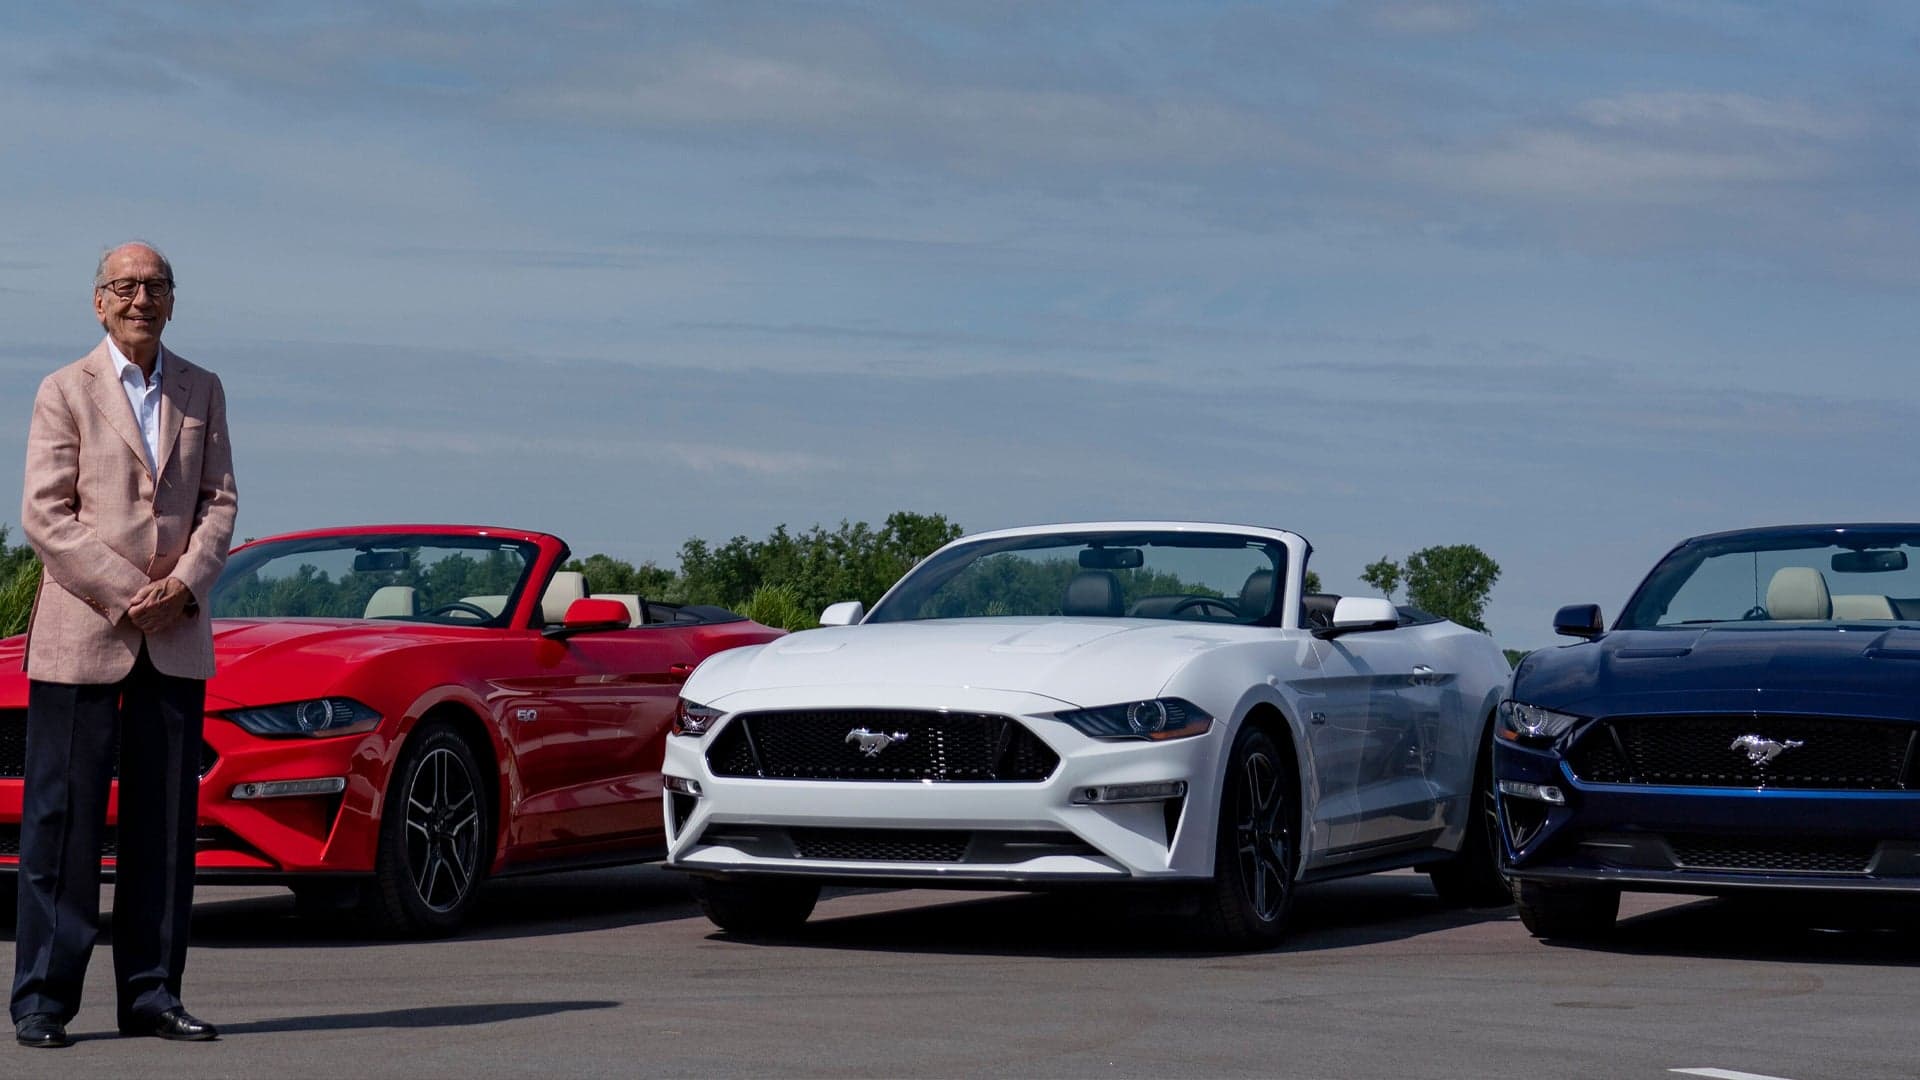 80-Year-Old Car Enthusiast Gifts Red, White, and Blue Ford Mustangs to Kids